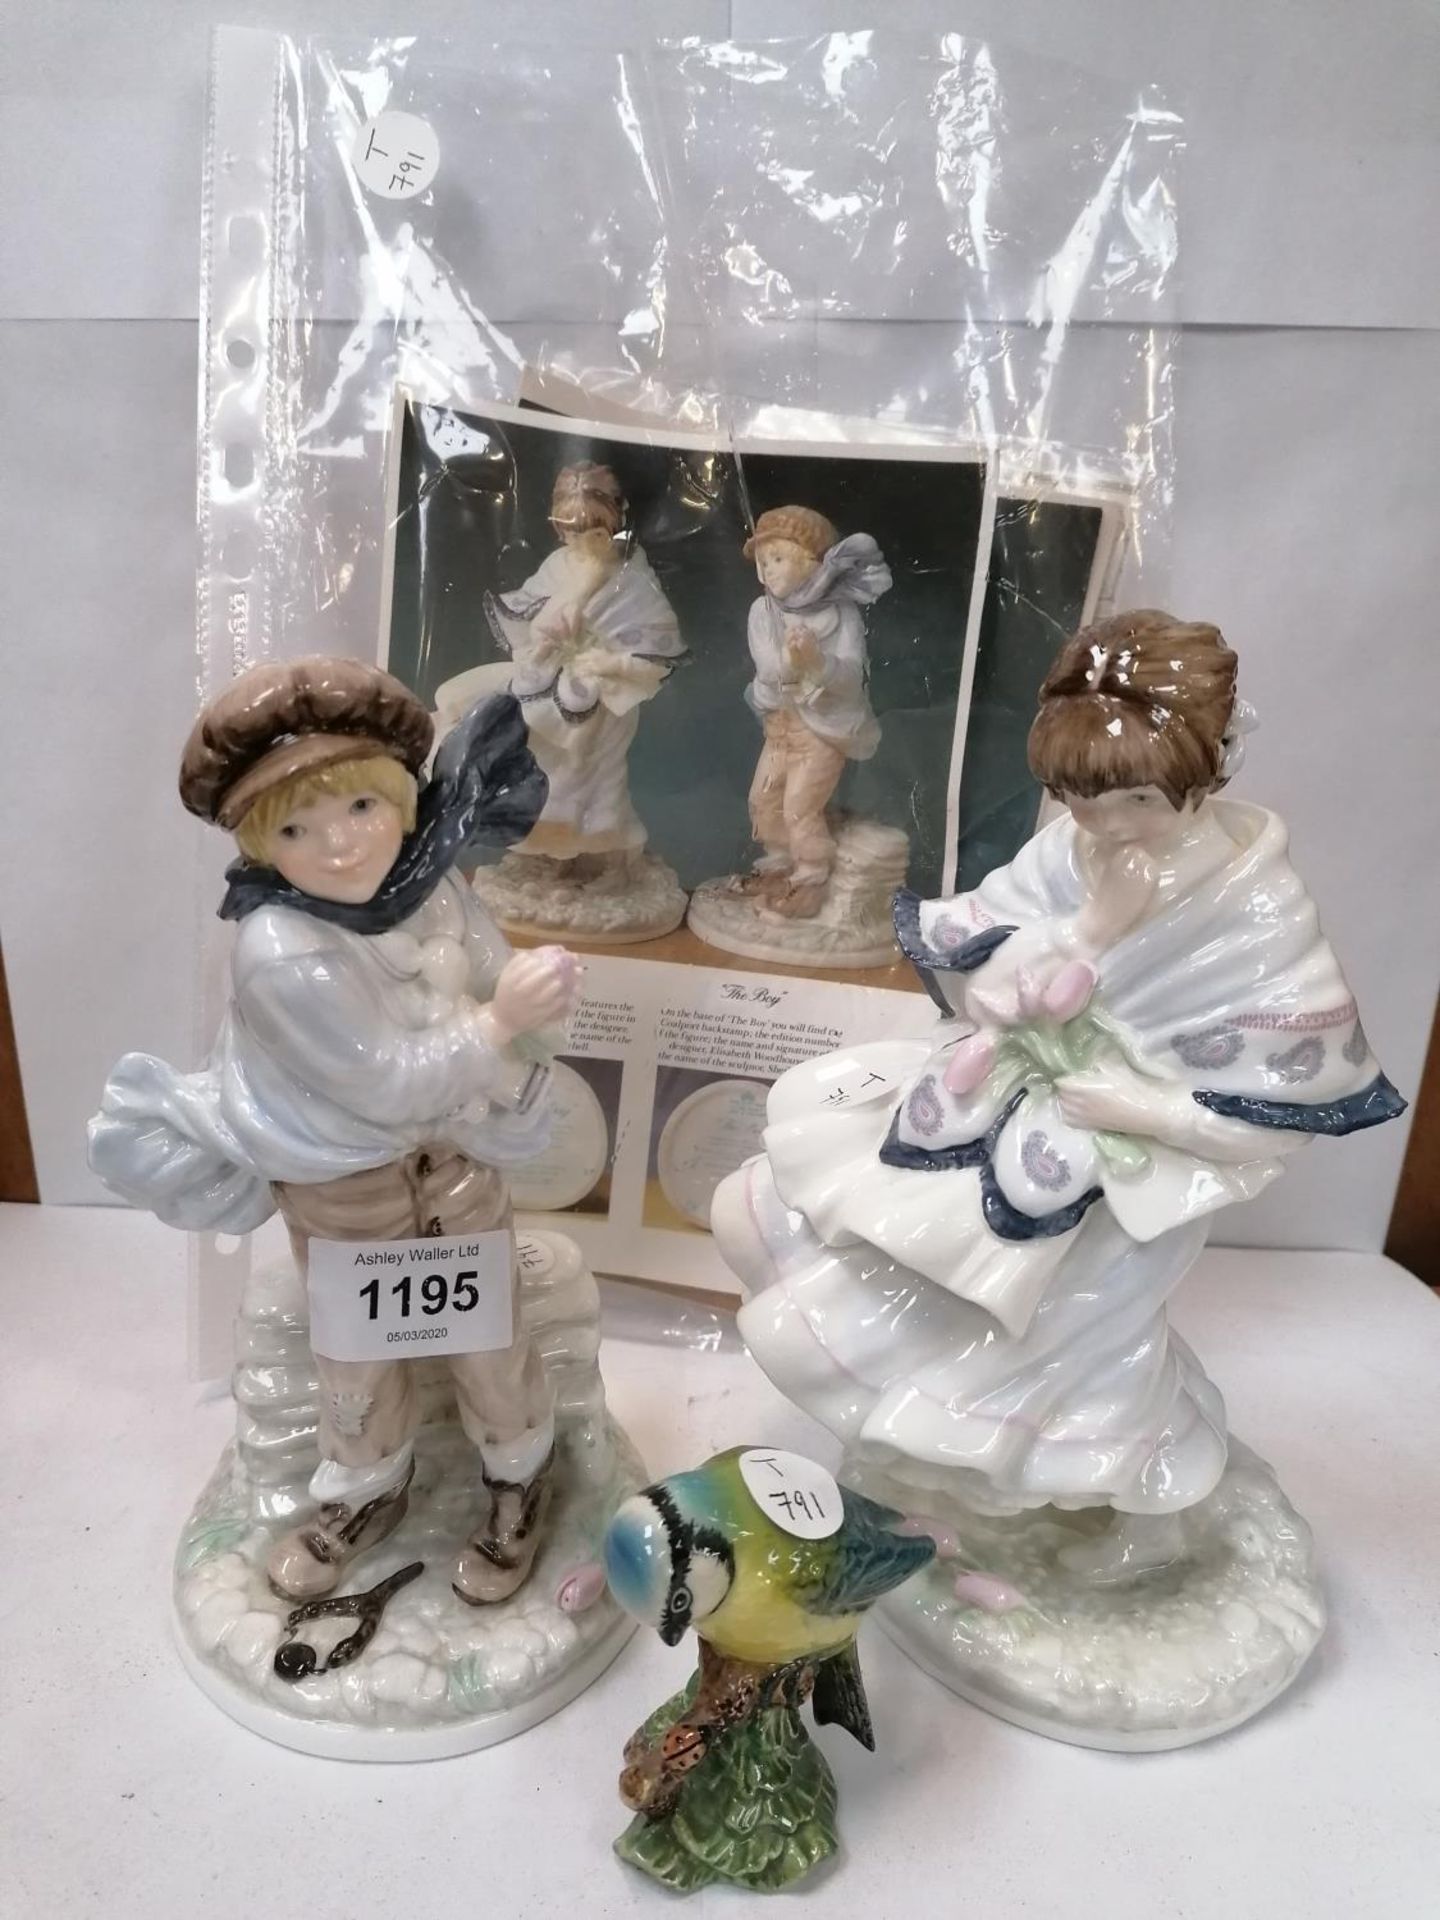 THREE ITEMS - TWO COALPORT FIGURES, 'THE BOY' AND 'VISITING DAY' TOGETHER WITH A BESWICK BLUE TIT